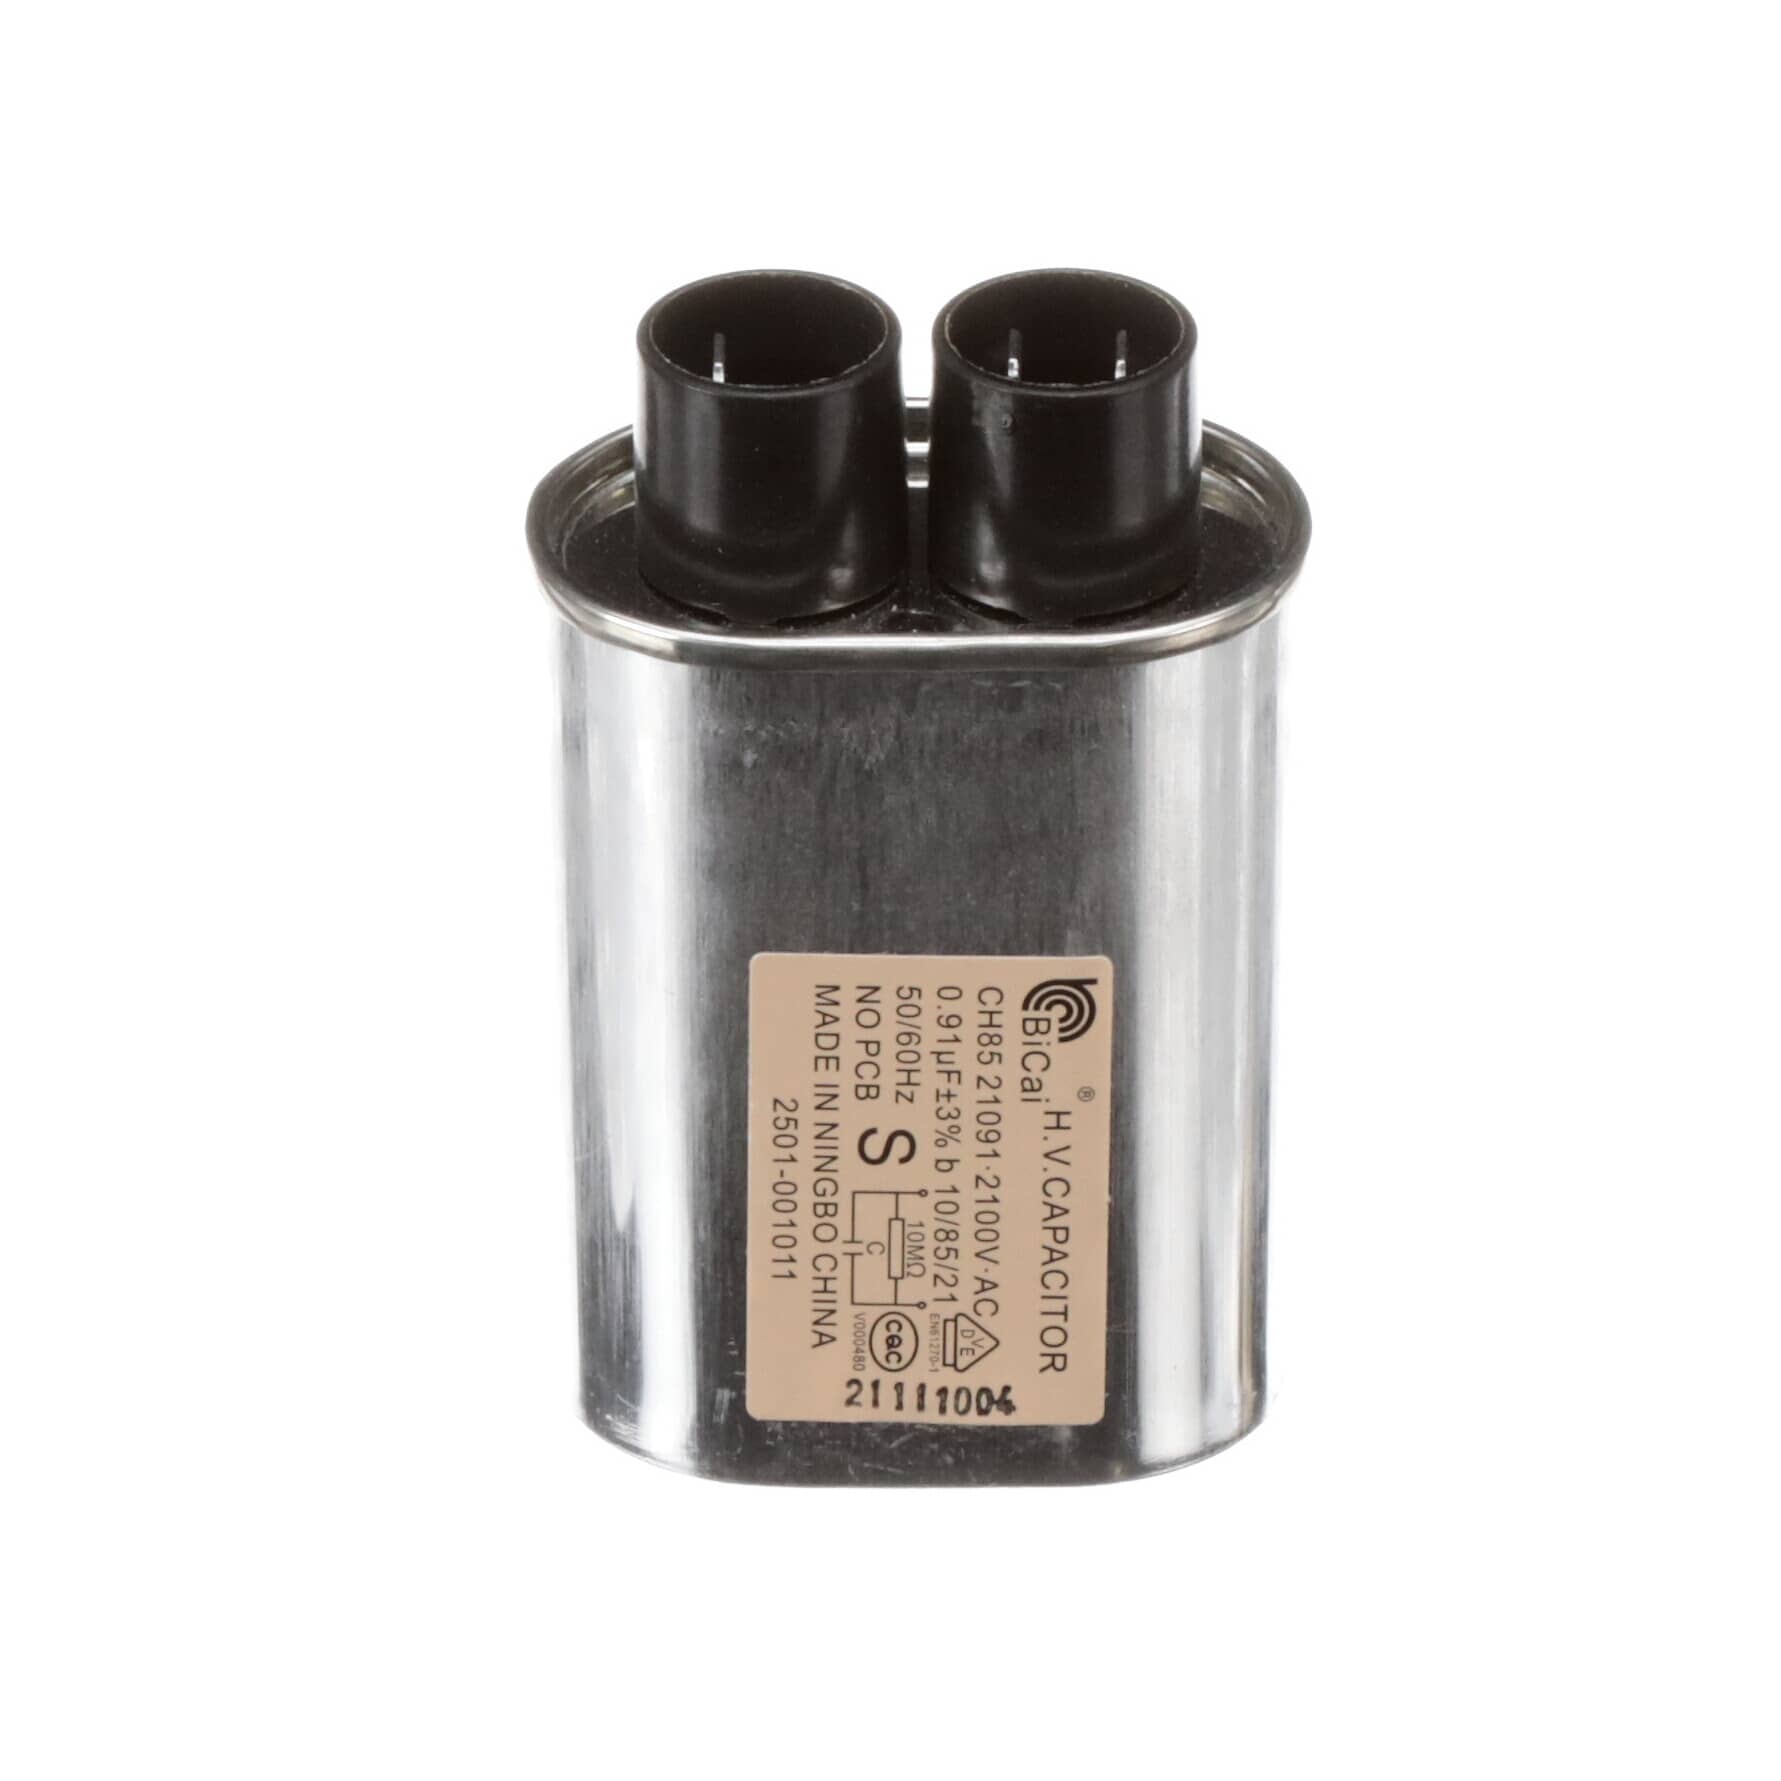 Samsung 2501-001011 Microwave High-Voltage Capacitor